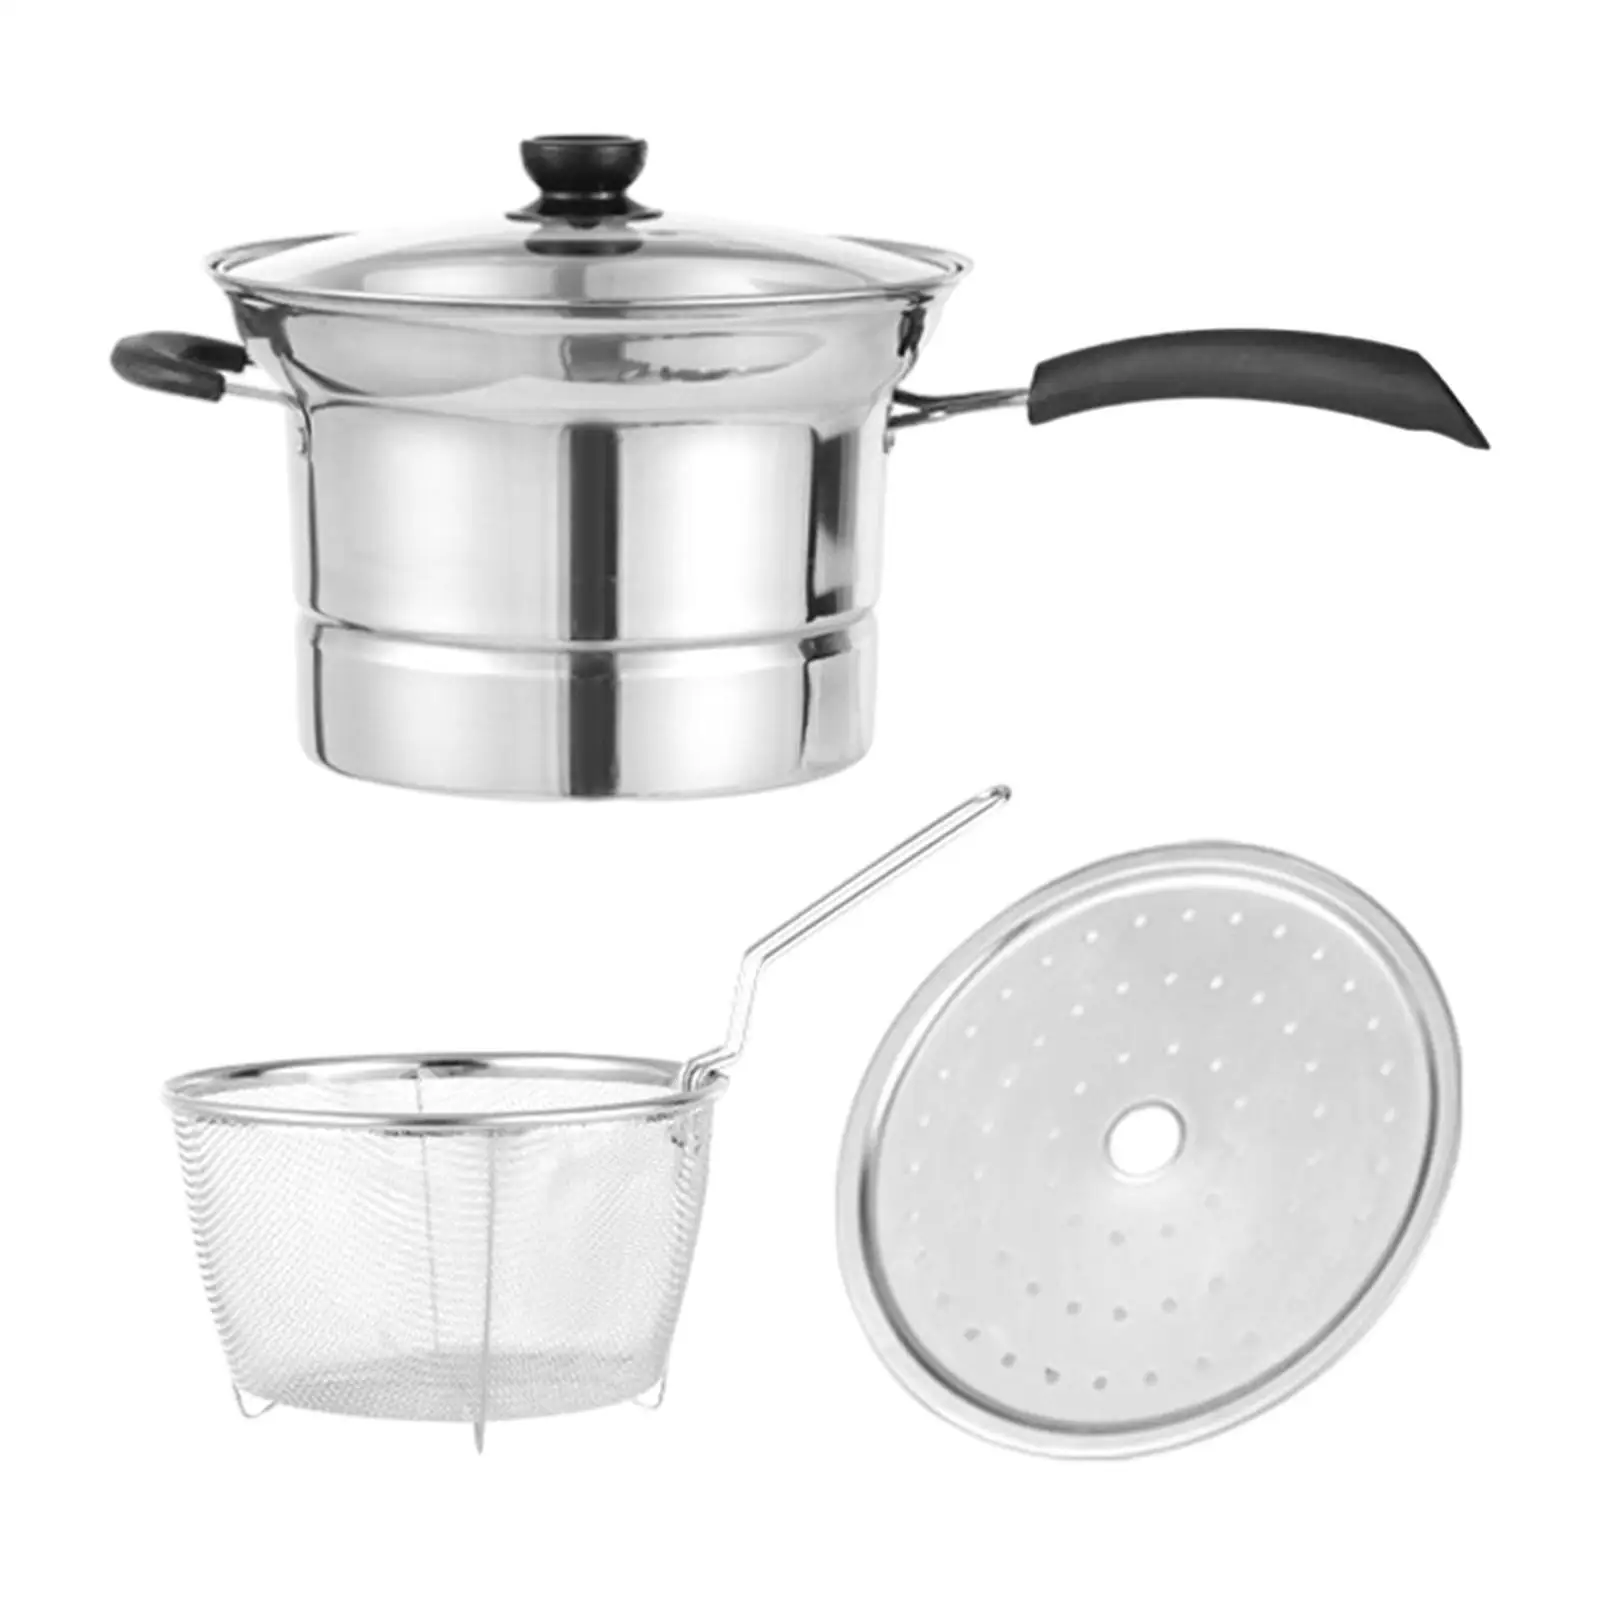 Deep Fryer Kitchenware Multifunction Pan Deep Fryer Cooking Pot with Strainer Basket for Dining Room Camping Home Kitchen Party